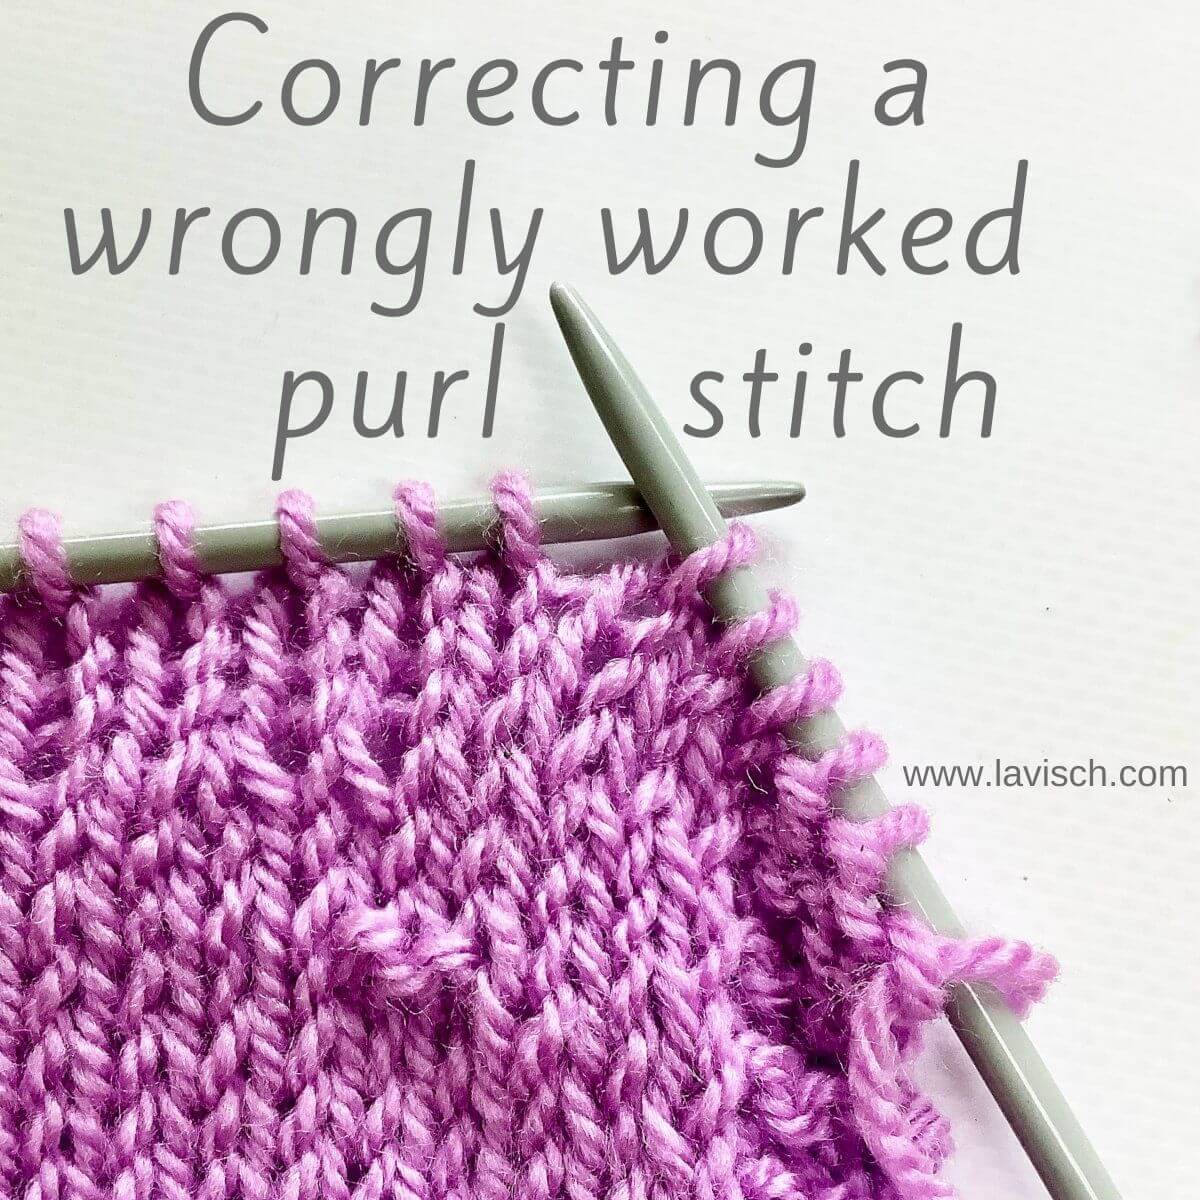 how-to-do-a-purl-stitch-discount-collection-save-62-jlcatj-gob-mx